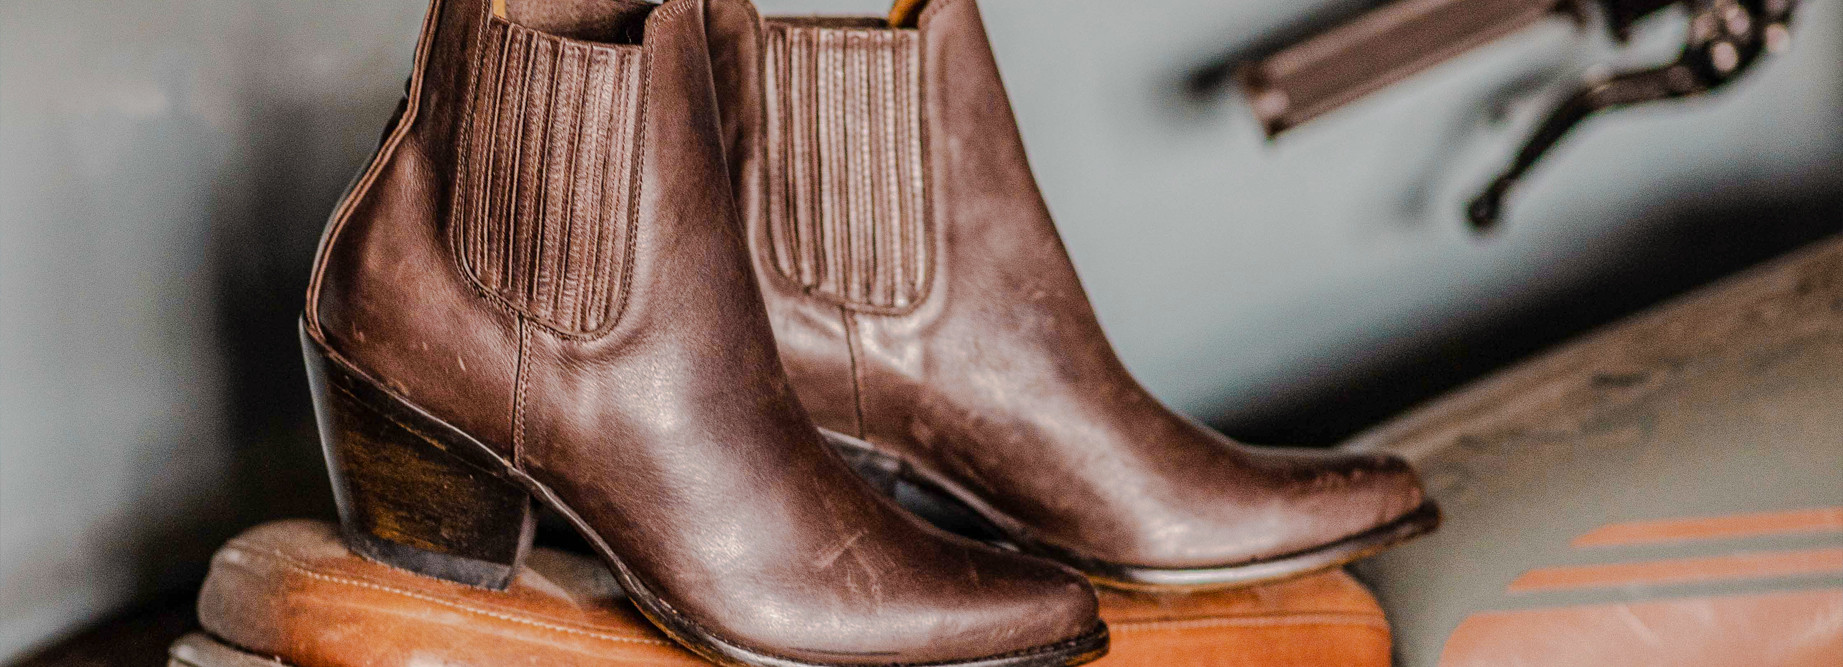 brown western boots in a garage environment